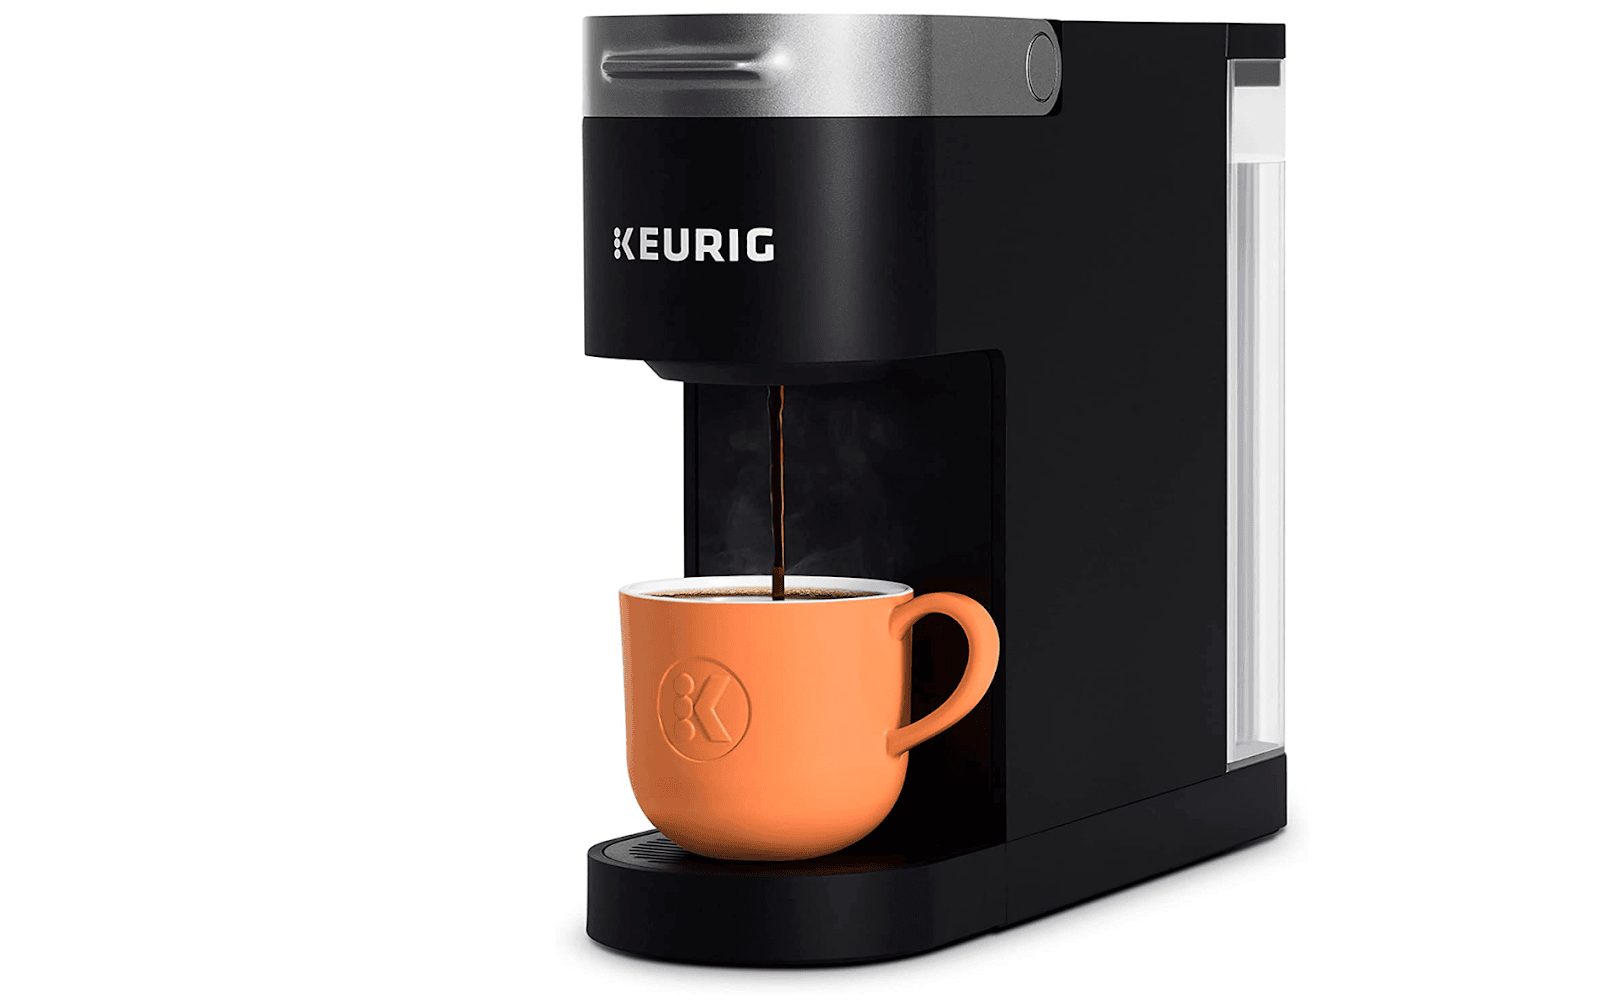 How to turn off Auto Off on Keurig